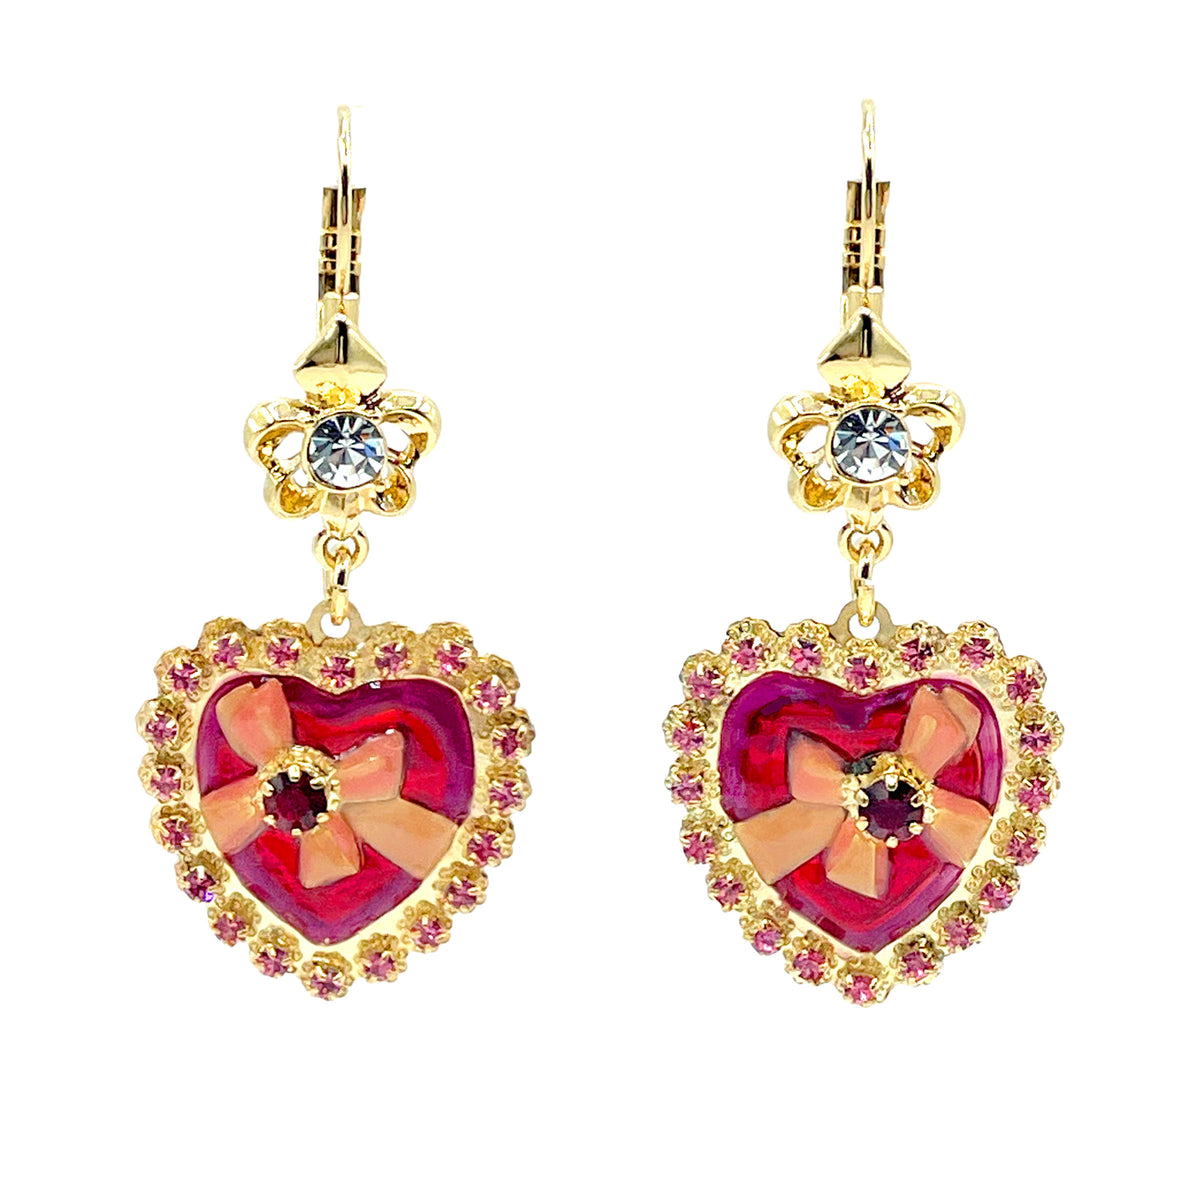 Lunch At The Ritz Valentine Love Heart & Bow Leverback Earrings 22K Gold Plating